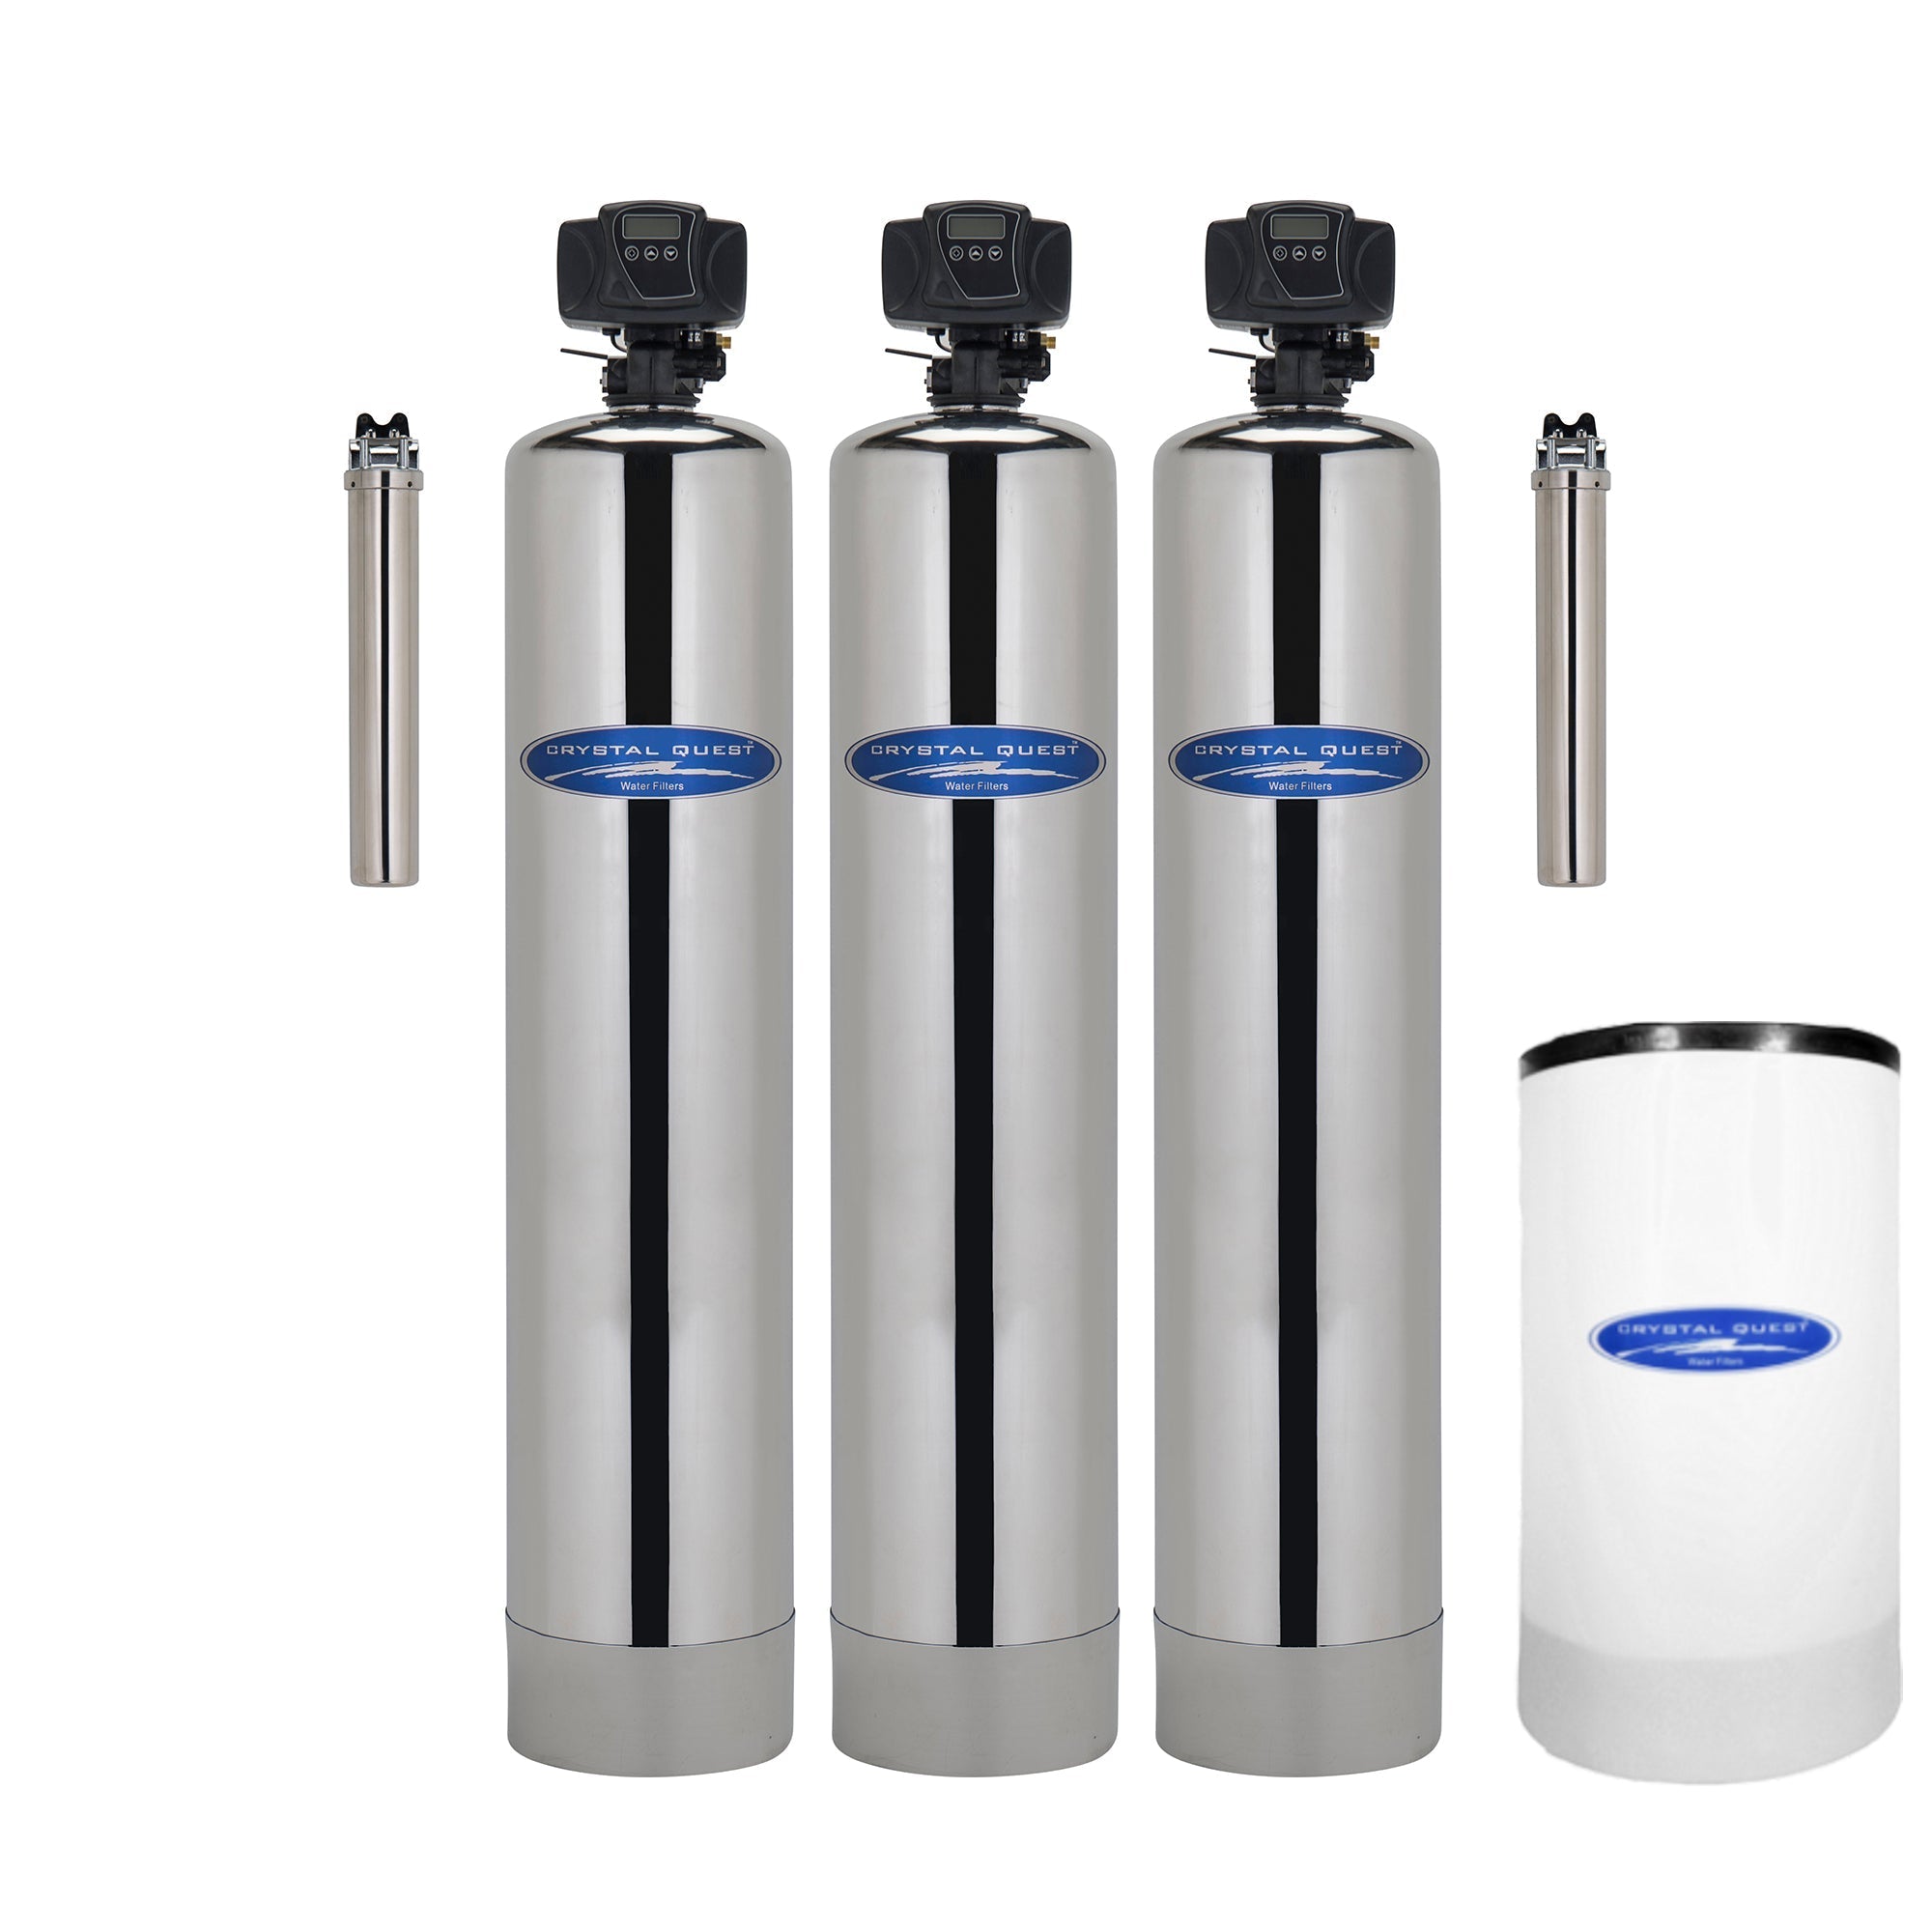 Add SMART Filter and Softener / Stainless Steel / 1.5 Turbidity Whole House Water Filter - Whole House Water Filters - Crystal Quest